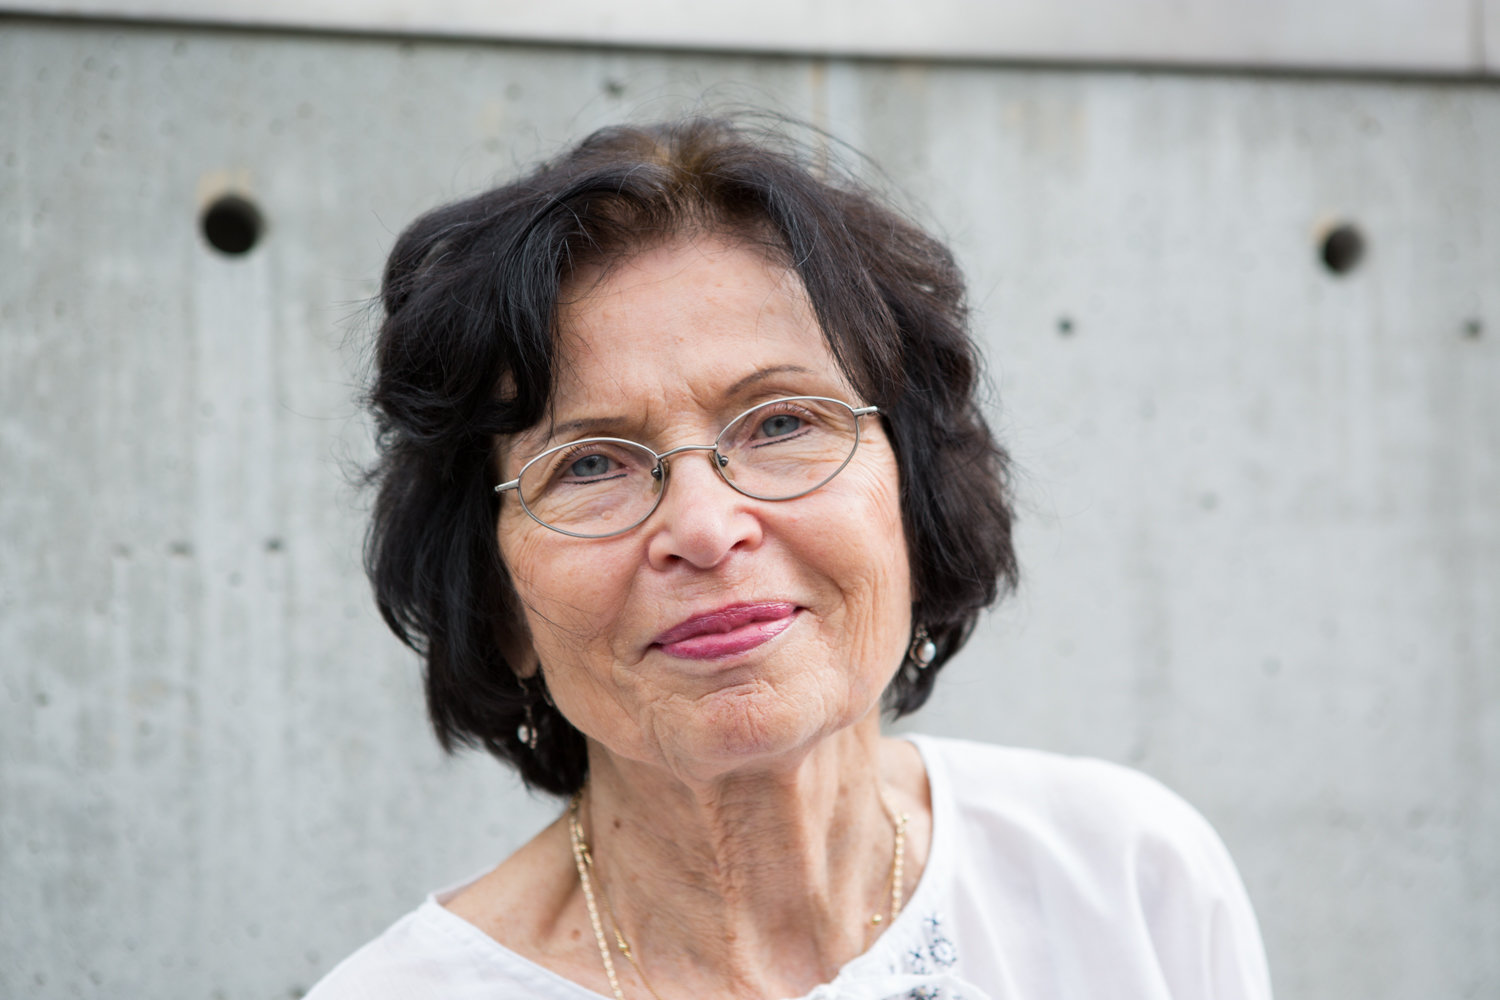 Anneros Valensi found writing late in life, turning it into an opportunity to write not one, but two books on her journey from East Germany following World War II to Riverdale in the 1970s. Valensi died April 29. She was 81.